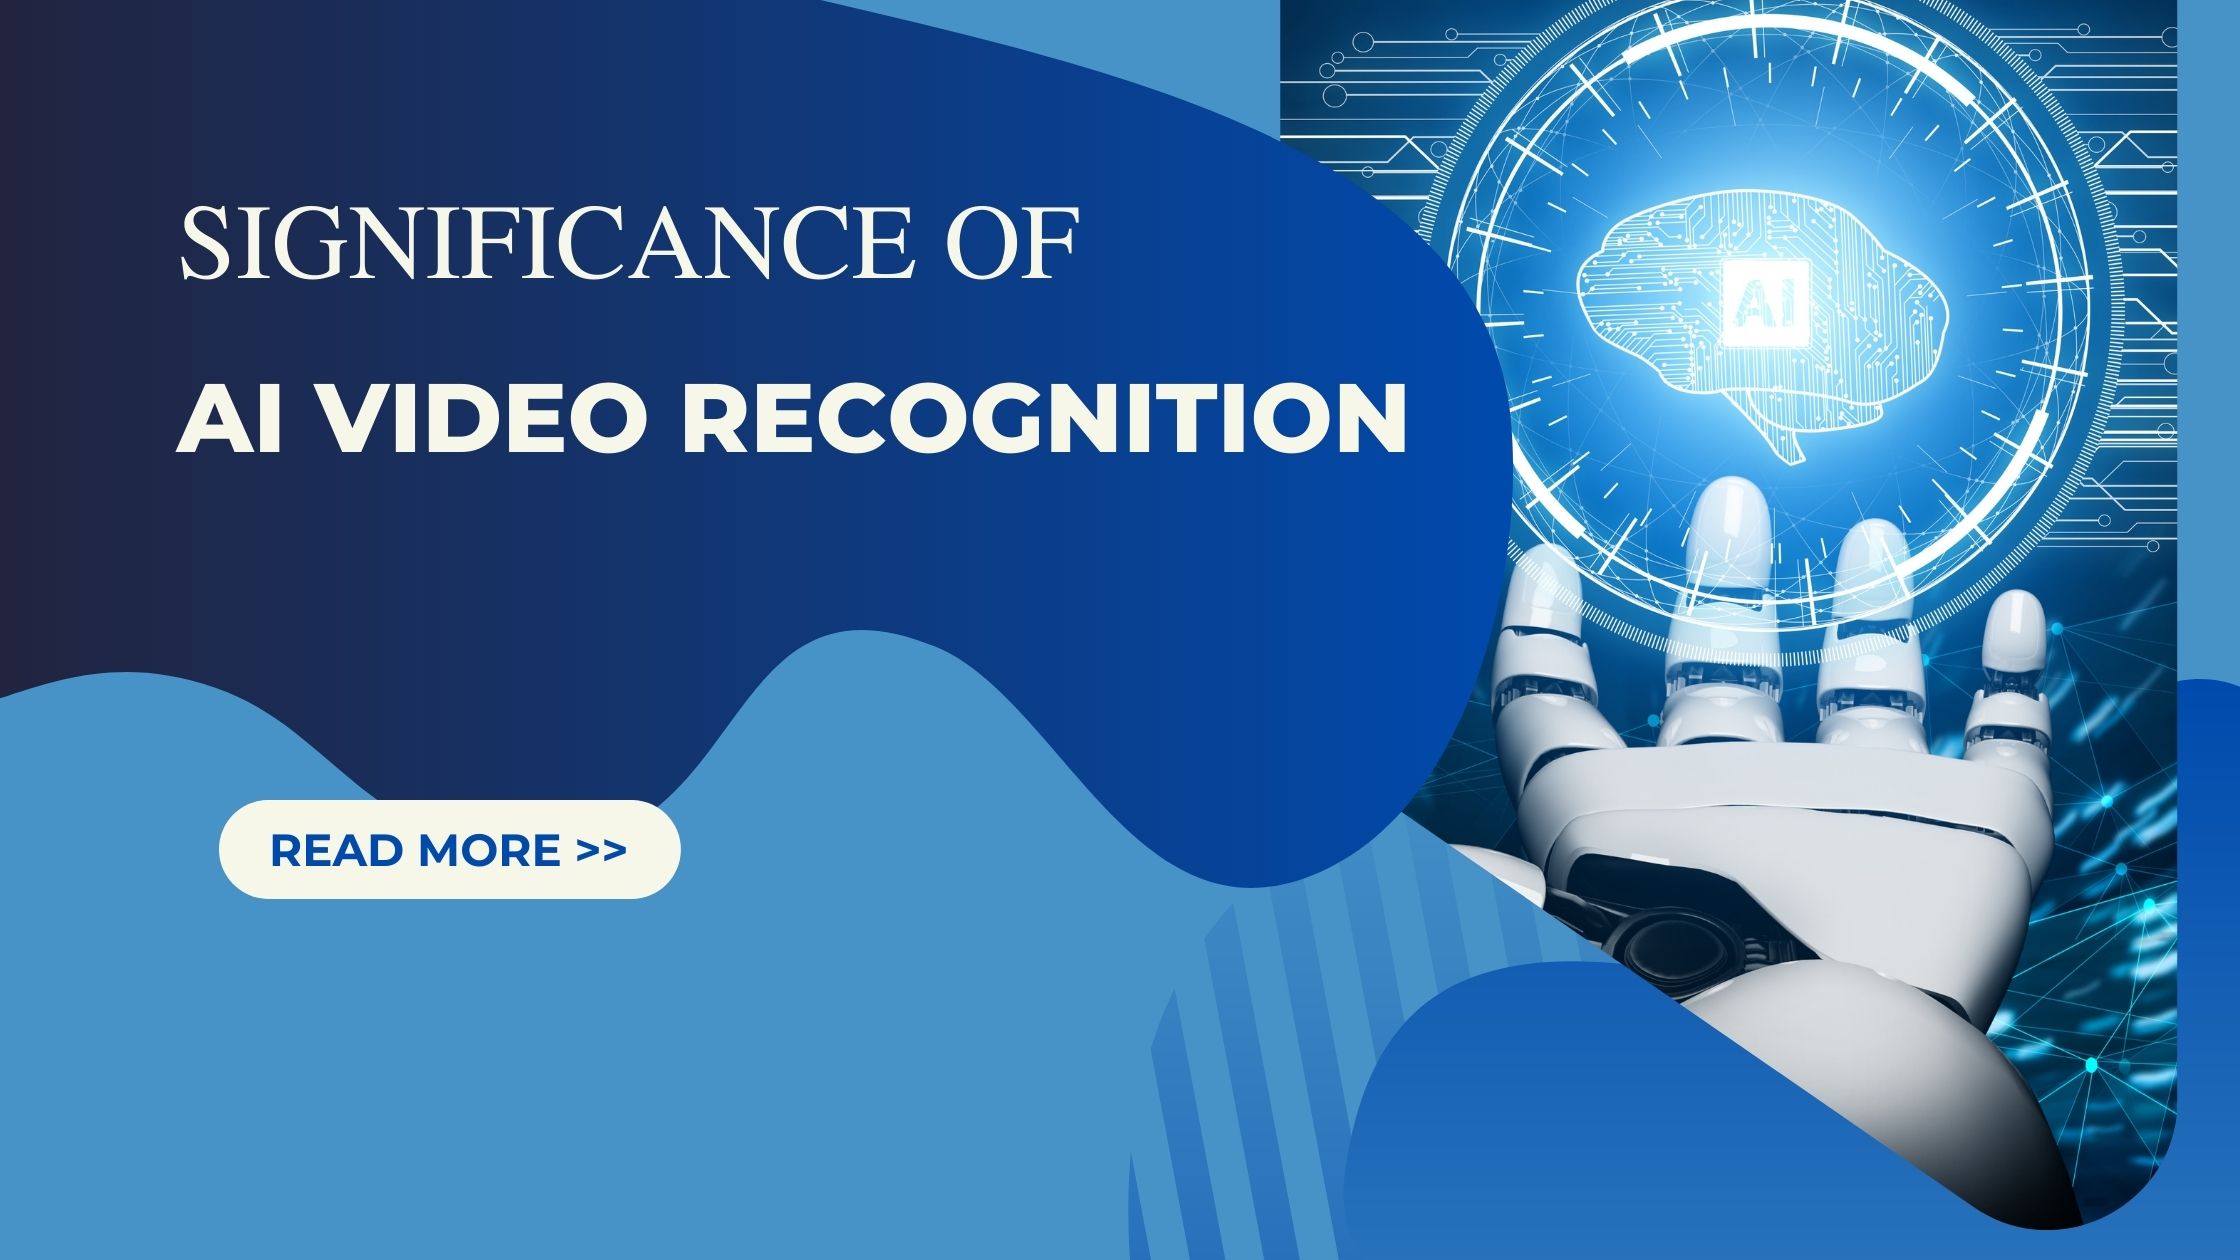 Significance of AI Video Recognition